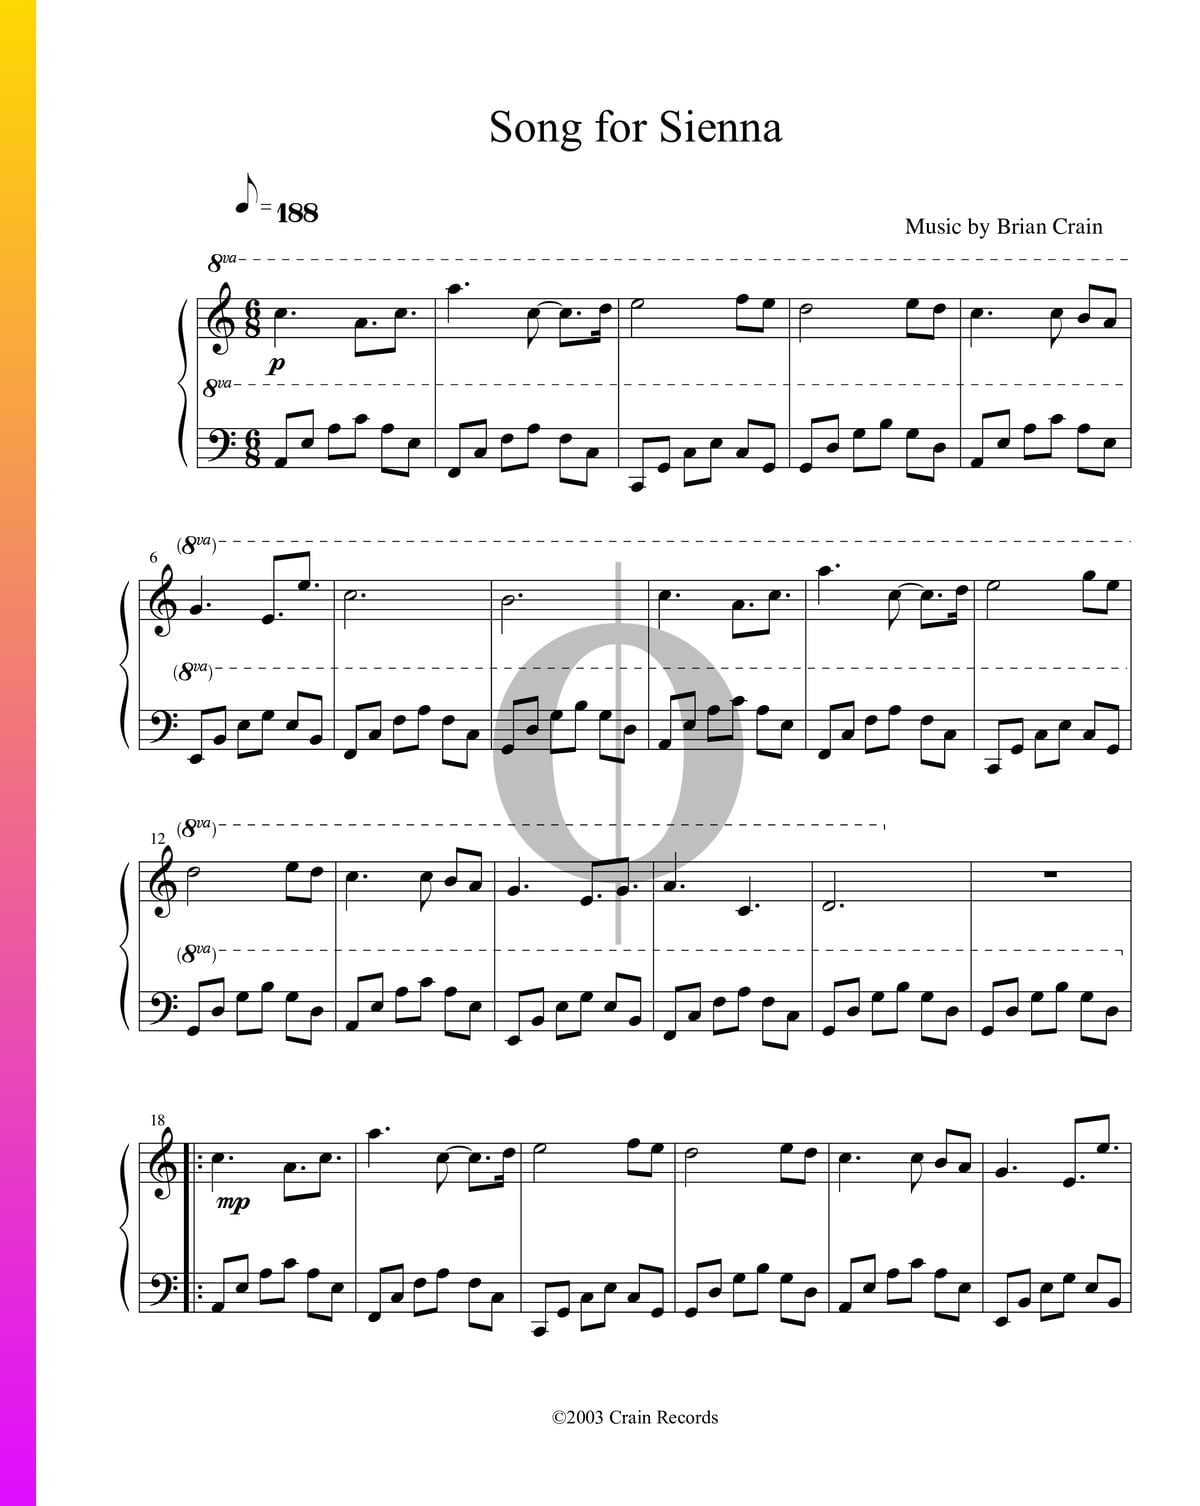 Song for sienna sheet music